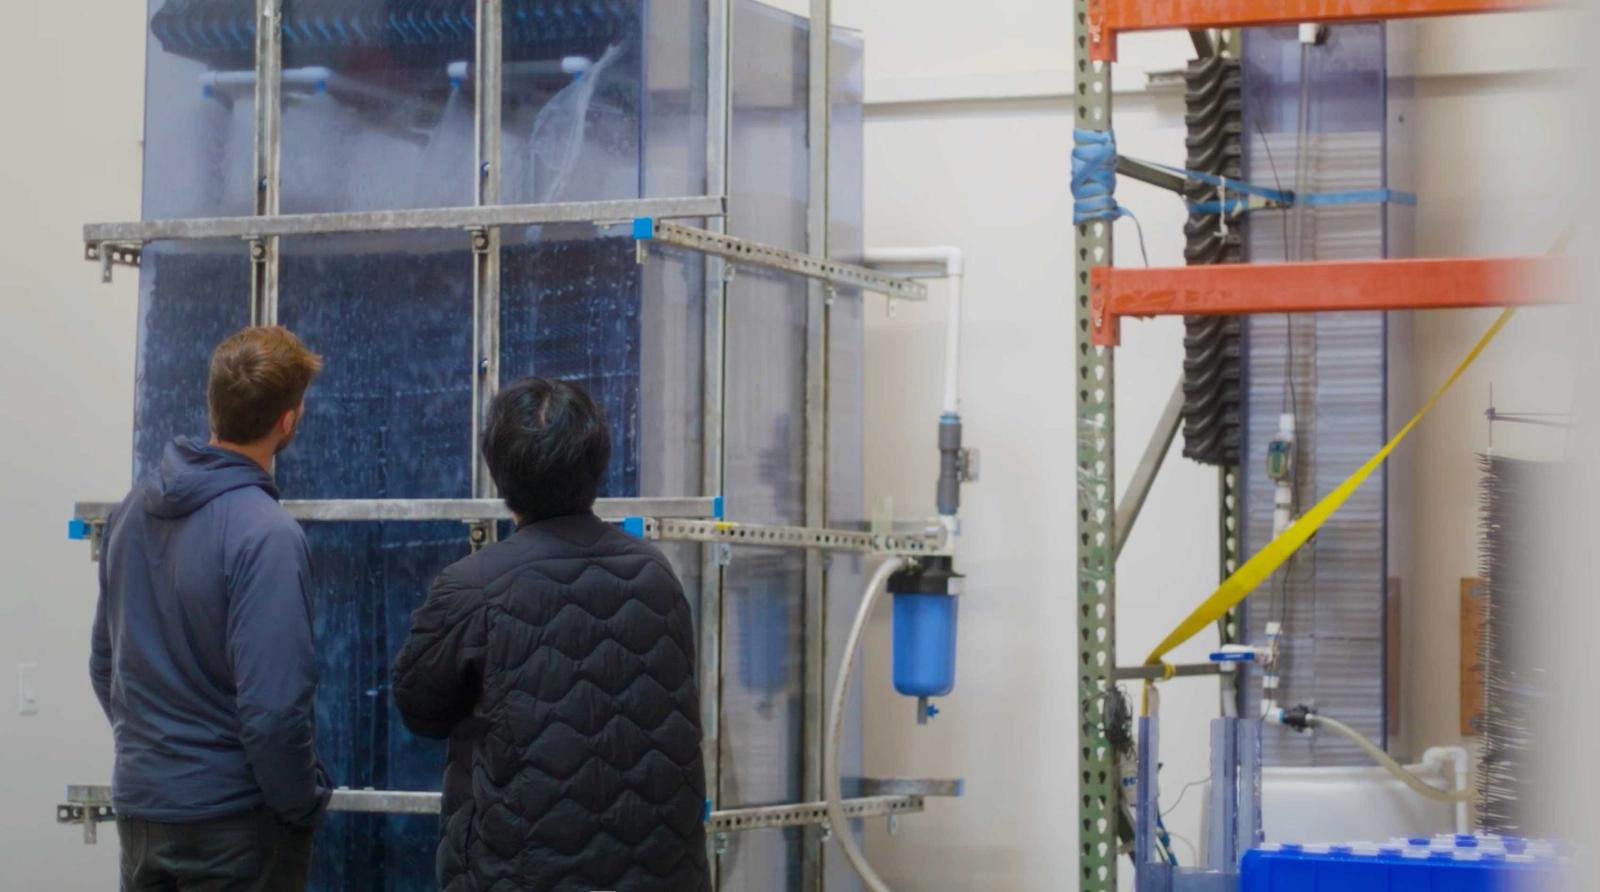 AirMyne taps geothermal energy to scale direct air carbon capture